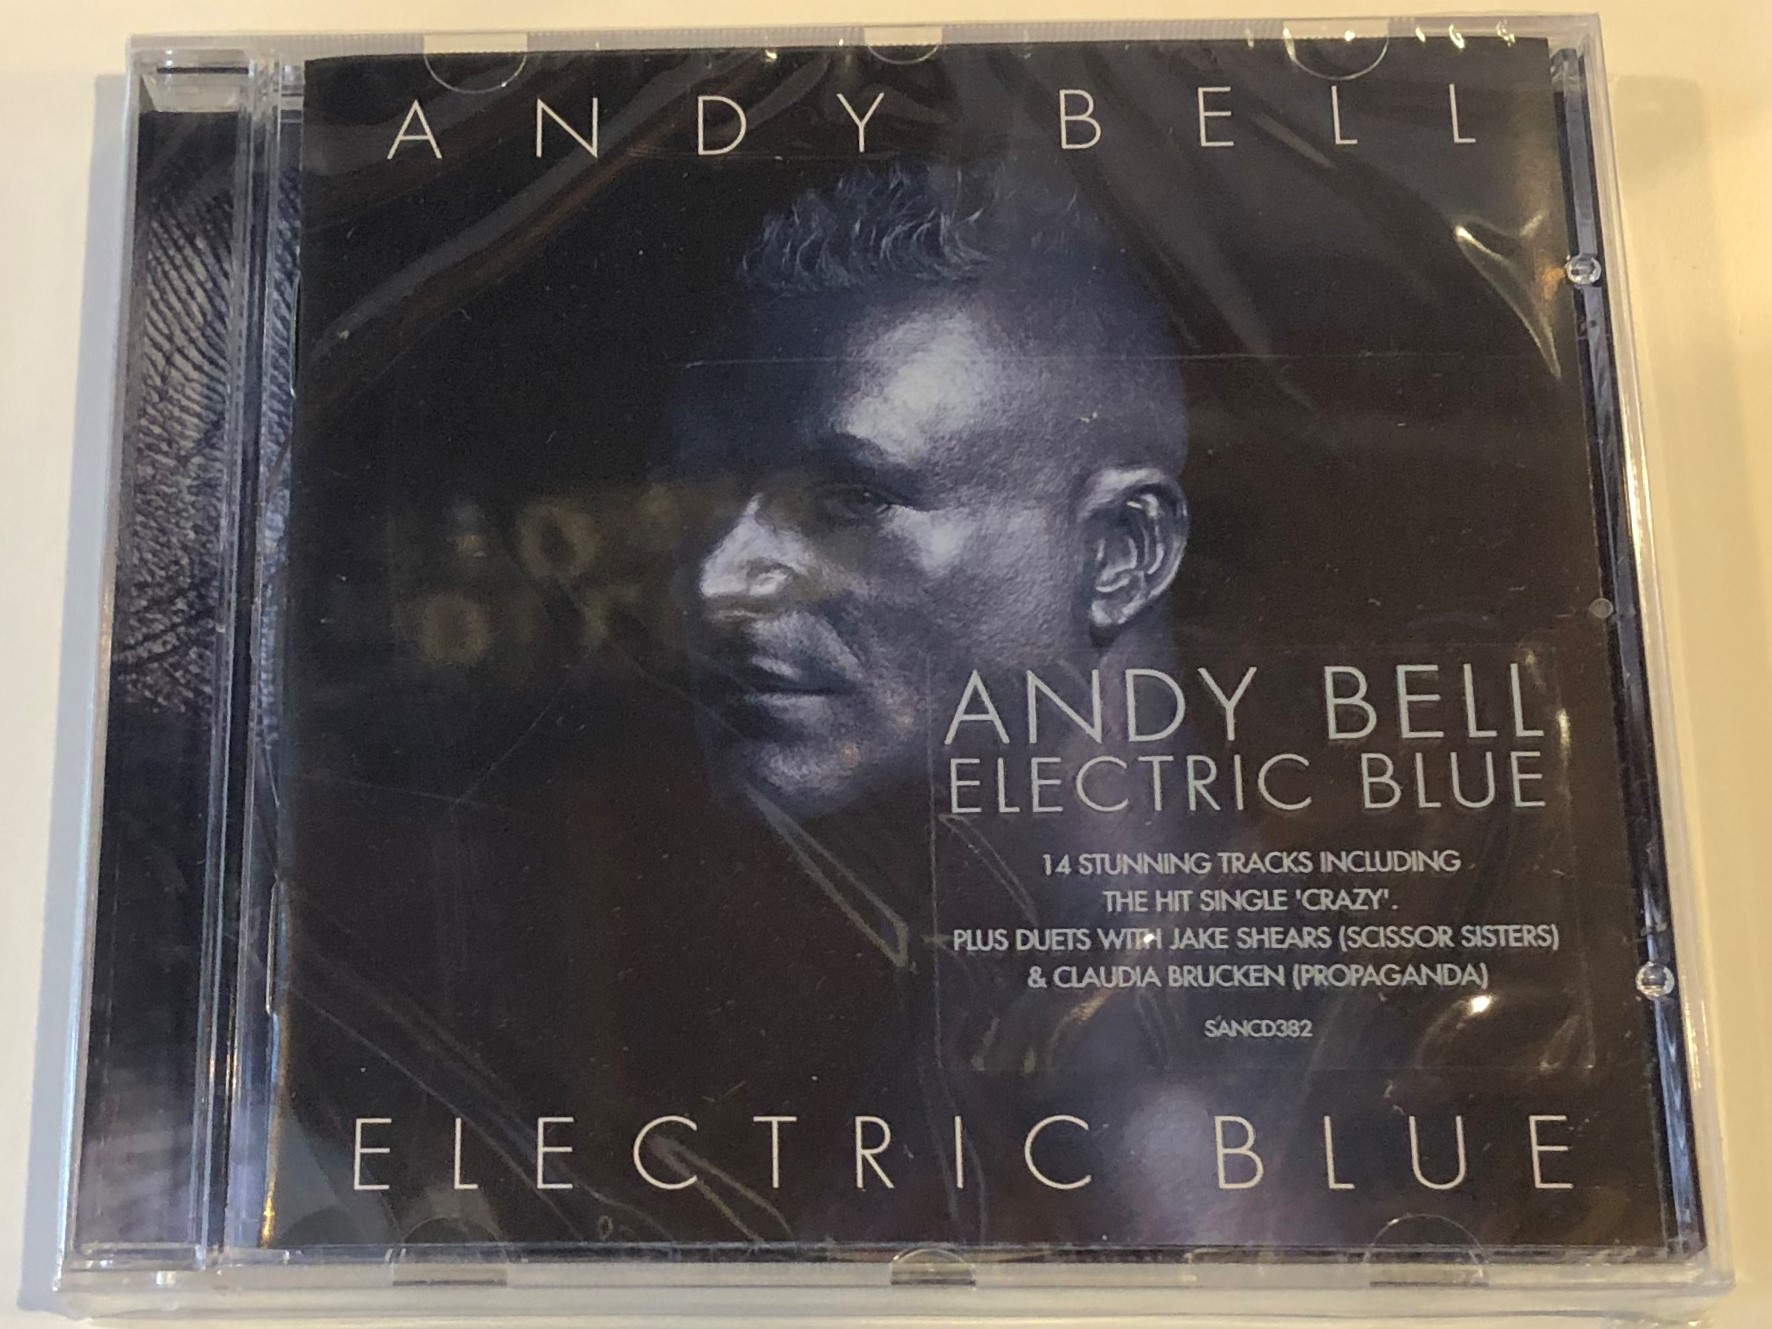 andy-bell-electric-blue-14-struning-tracks-including-the-hit-single-crazy-.-plus-duets-with-jake-shears-scissor-sisters-claudia-brucken-propaganda-sanctuary-records-audio-cd-2005-s-1-.jpg